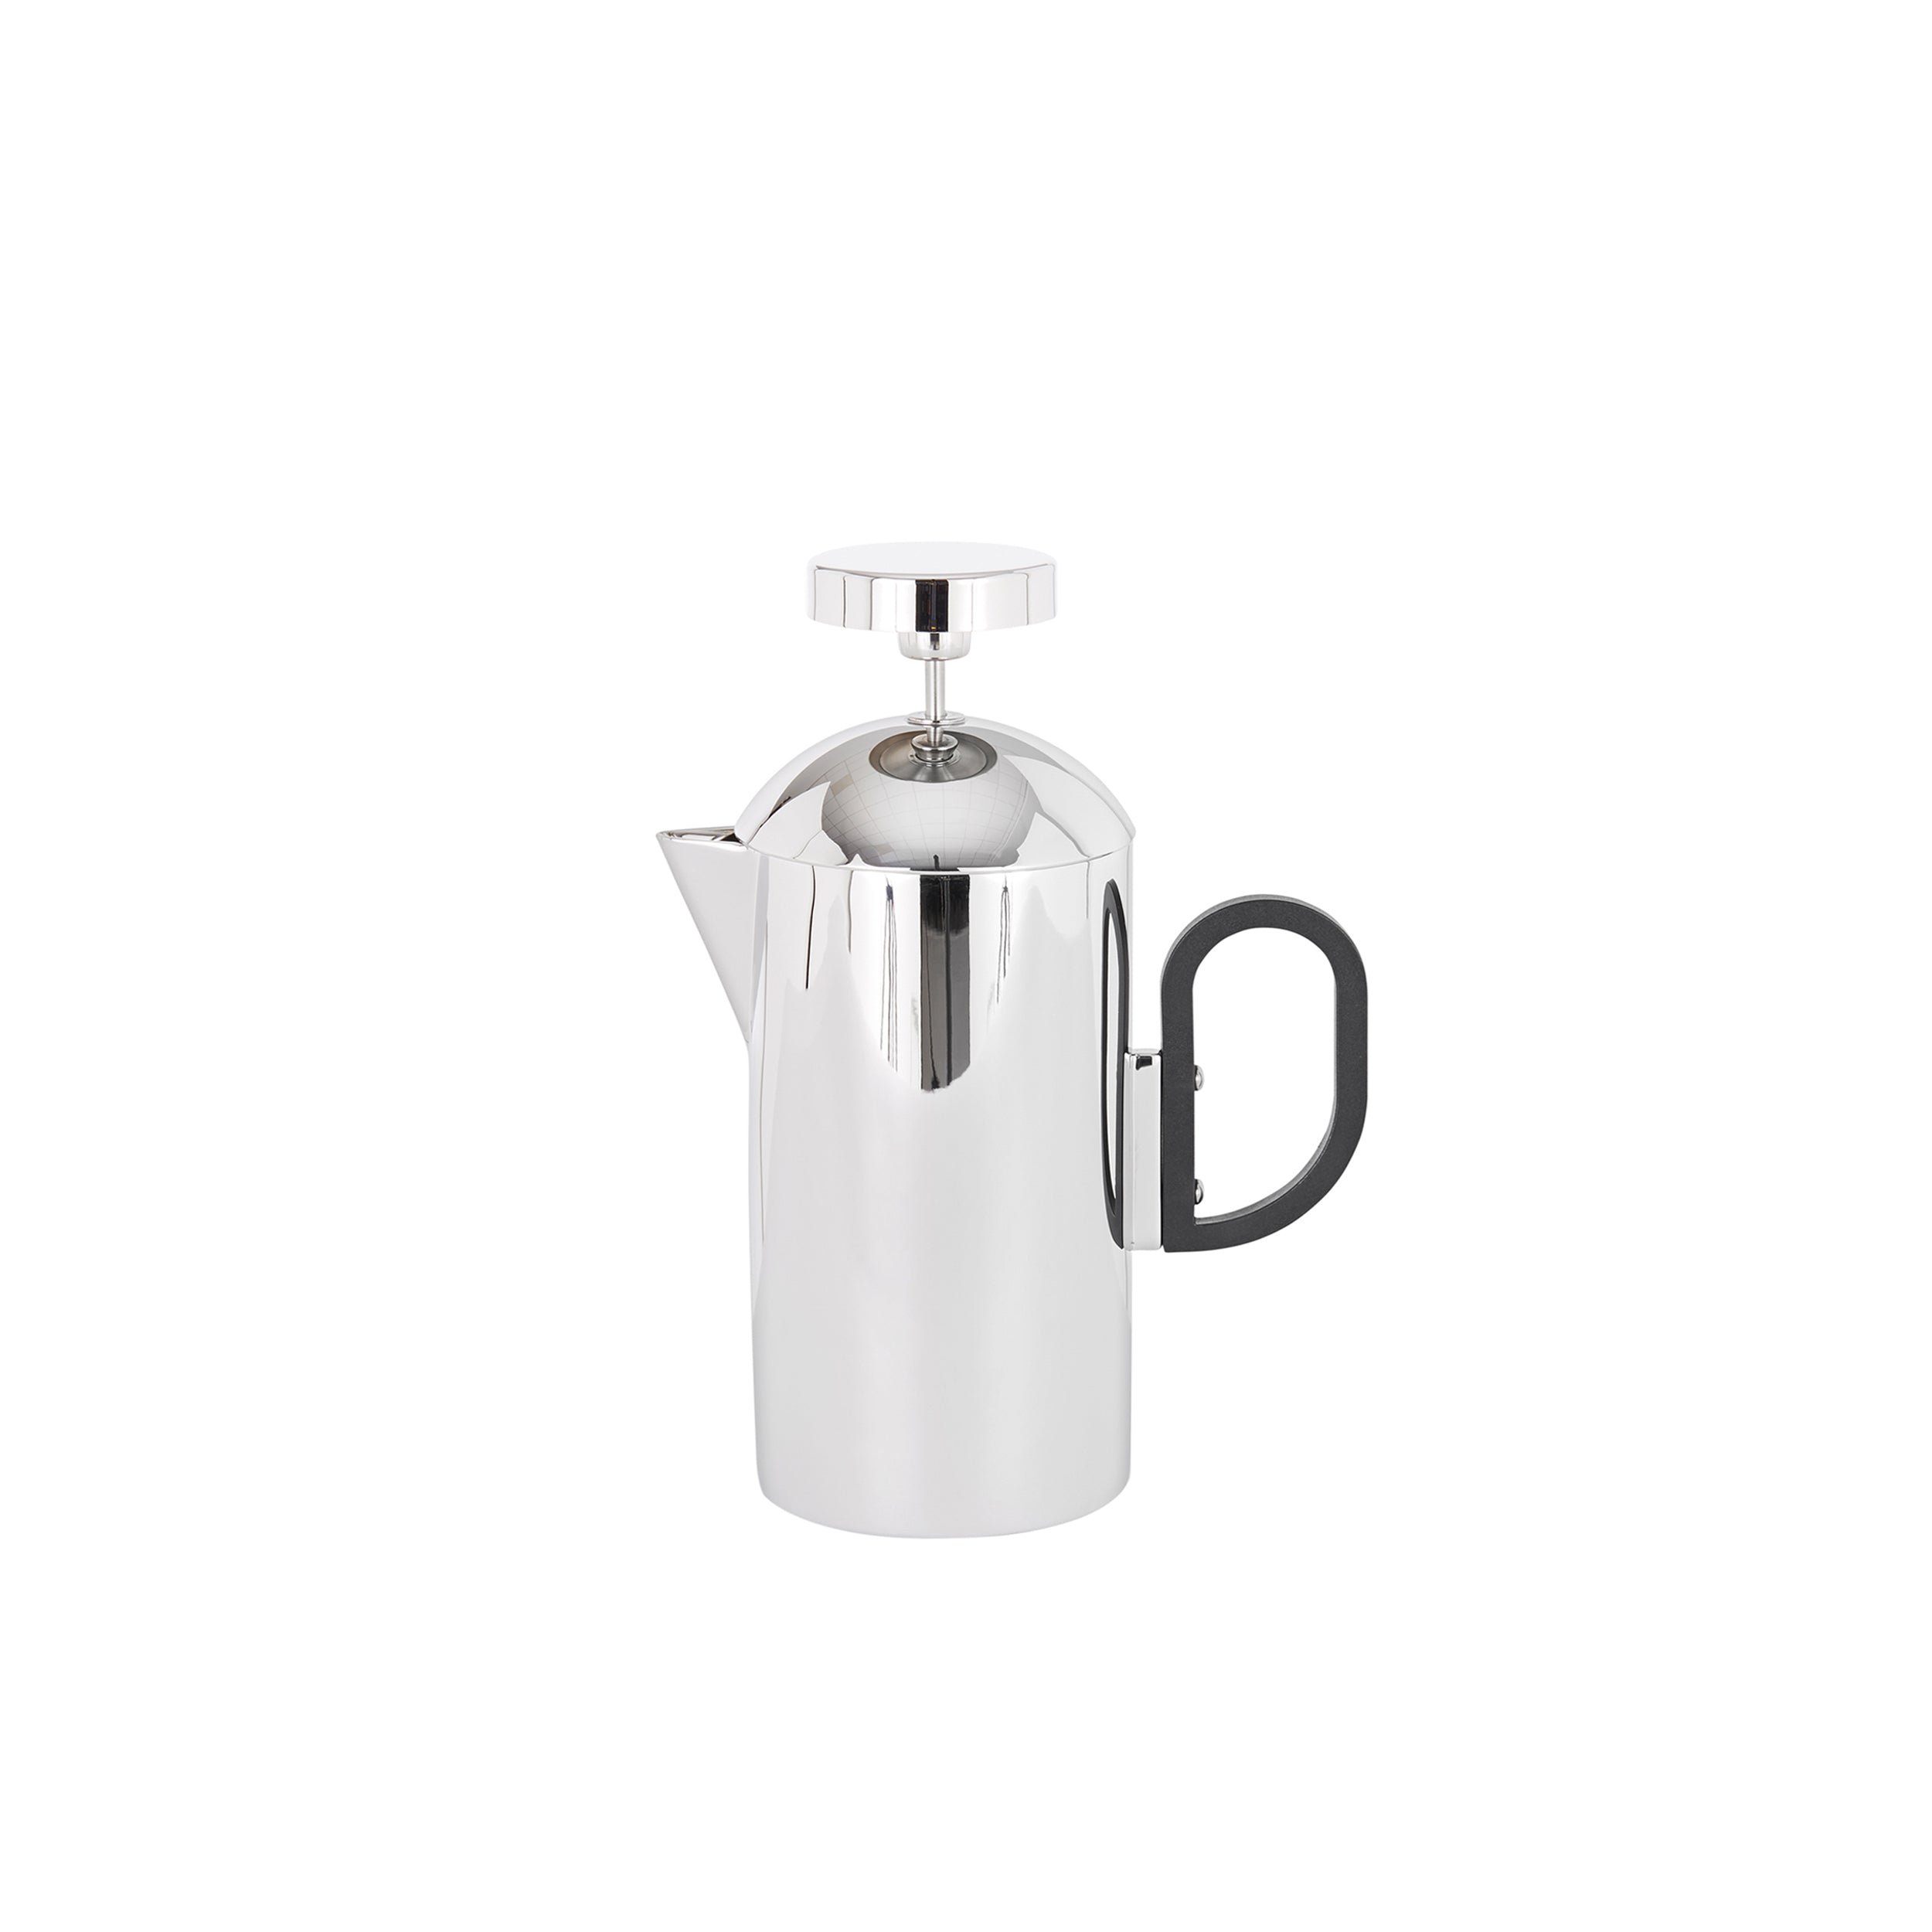 Brew Cafetiere (French Press): Stainless Steel